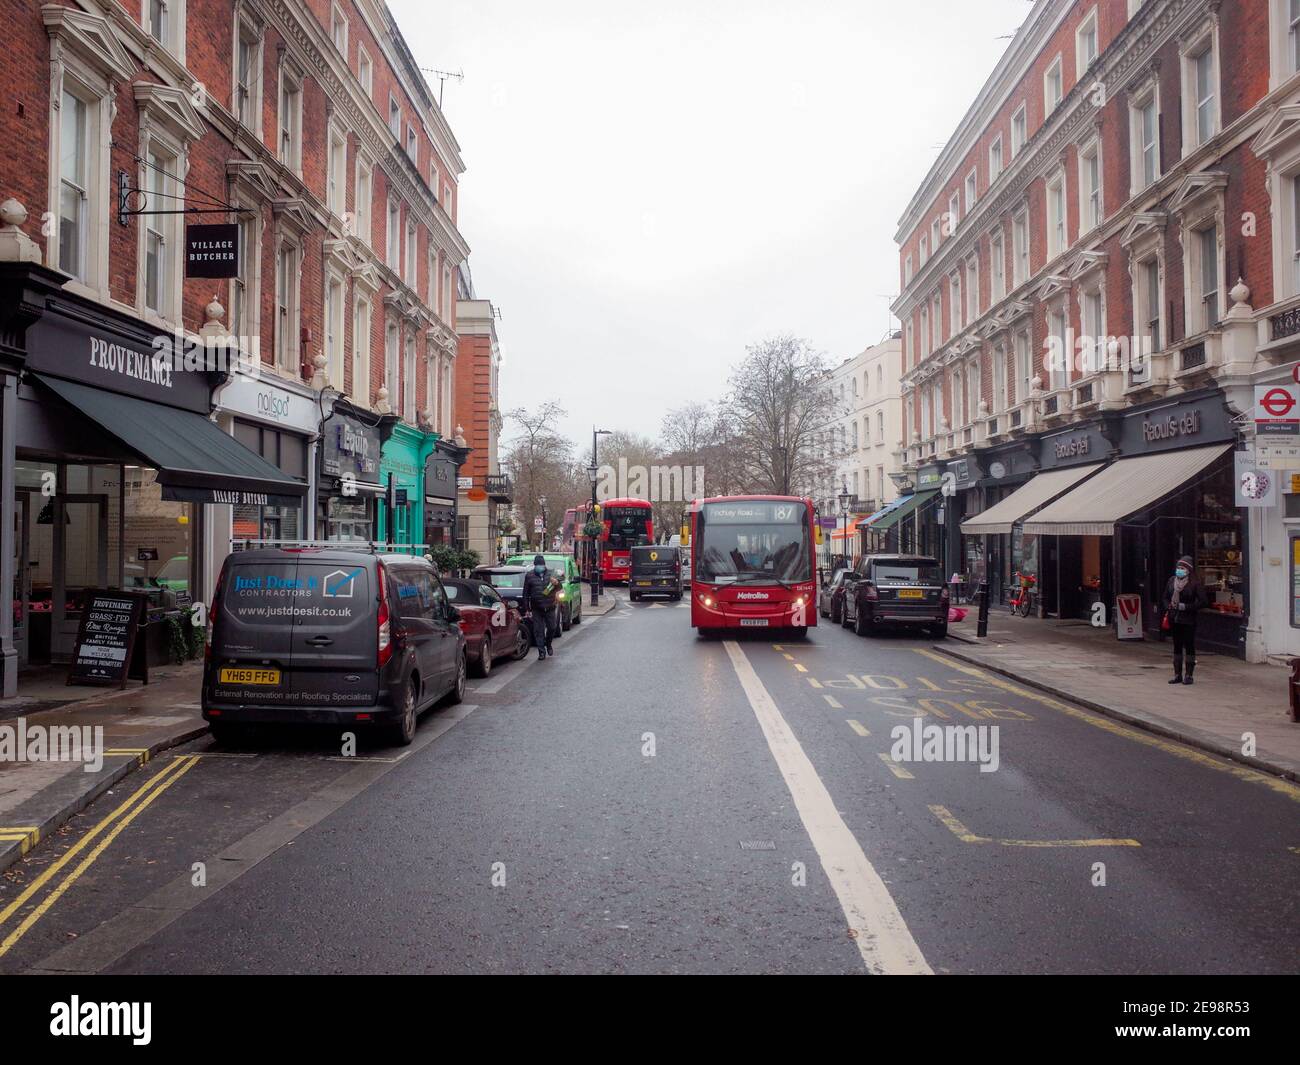 London- Clifton Road in Maida Vale, a street of local shops. Stock Photo